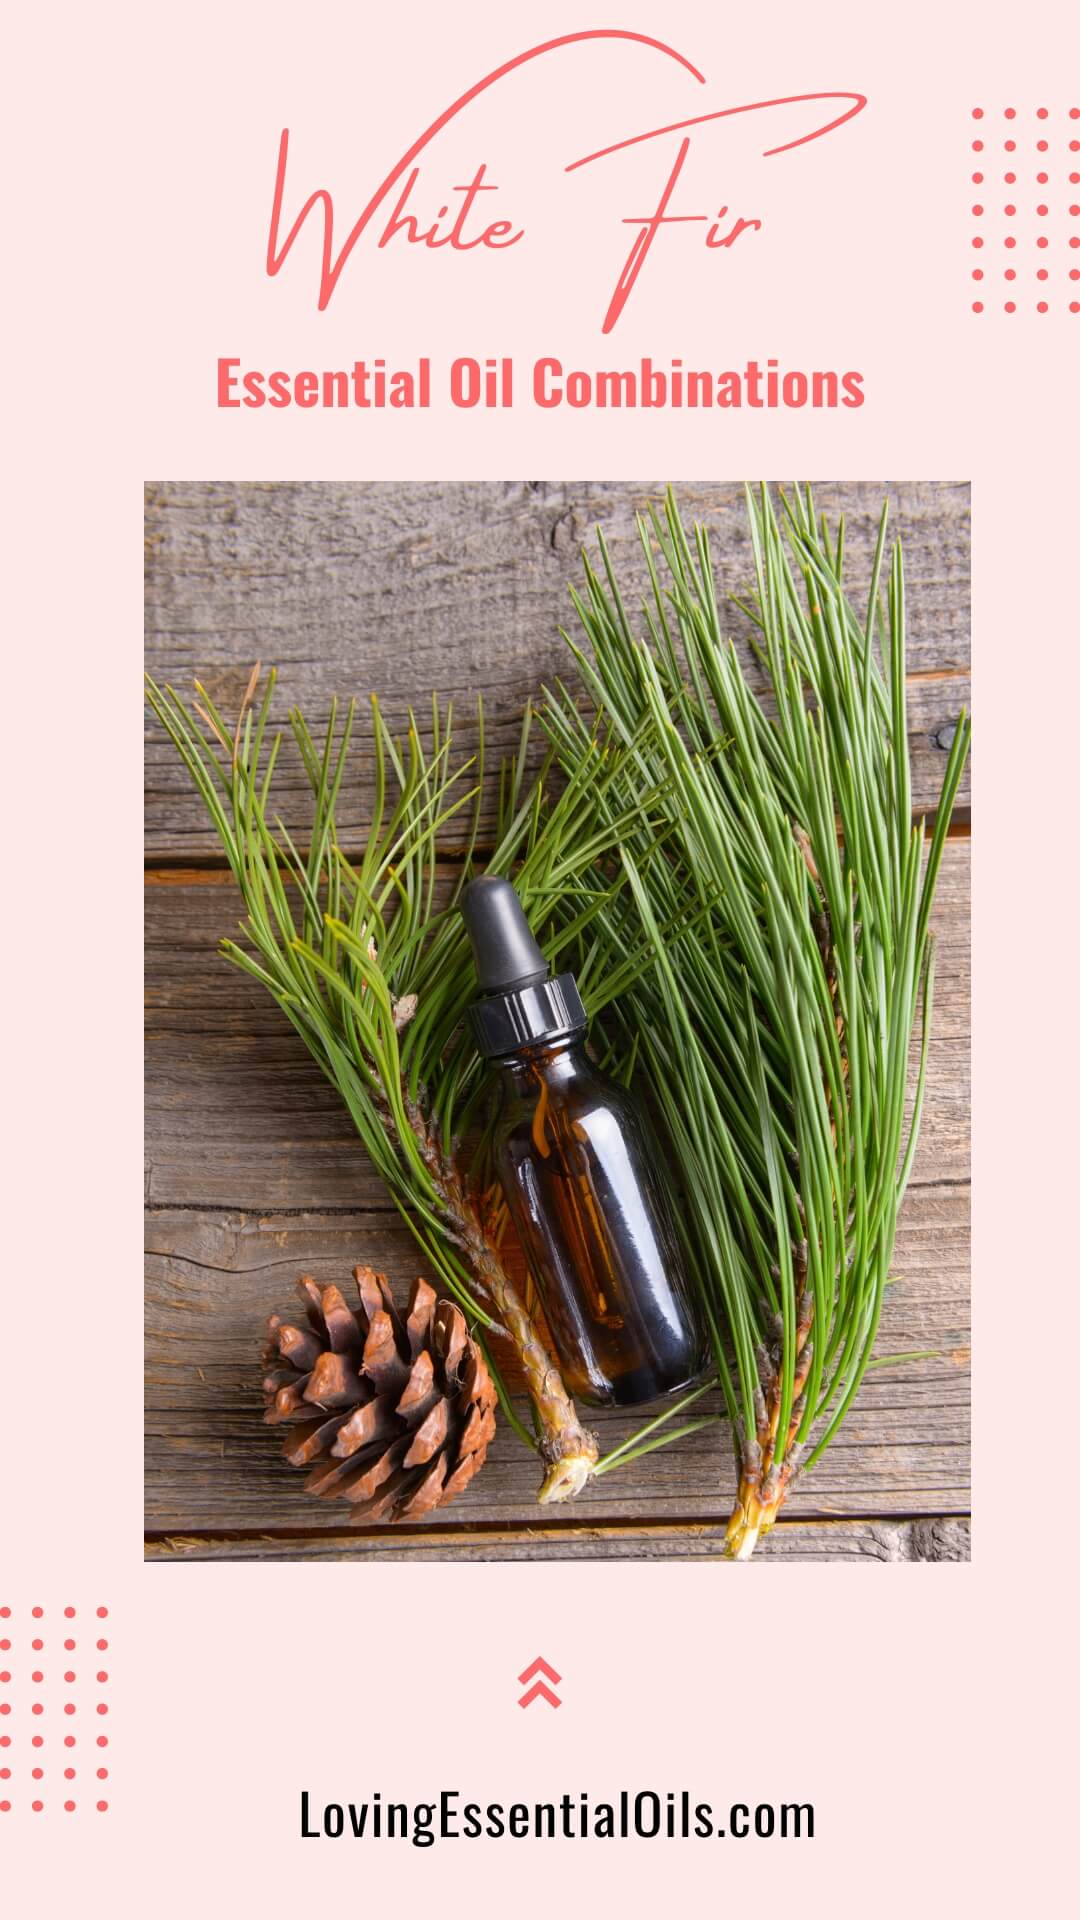 White Fir Essential Oil Combinations by Loving Essential Oils